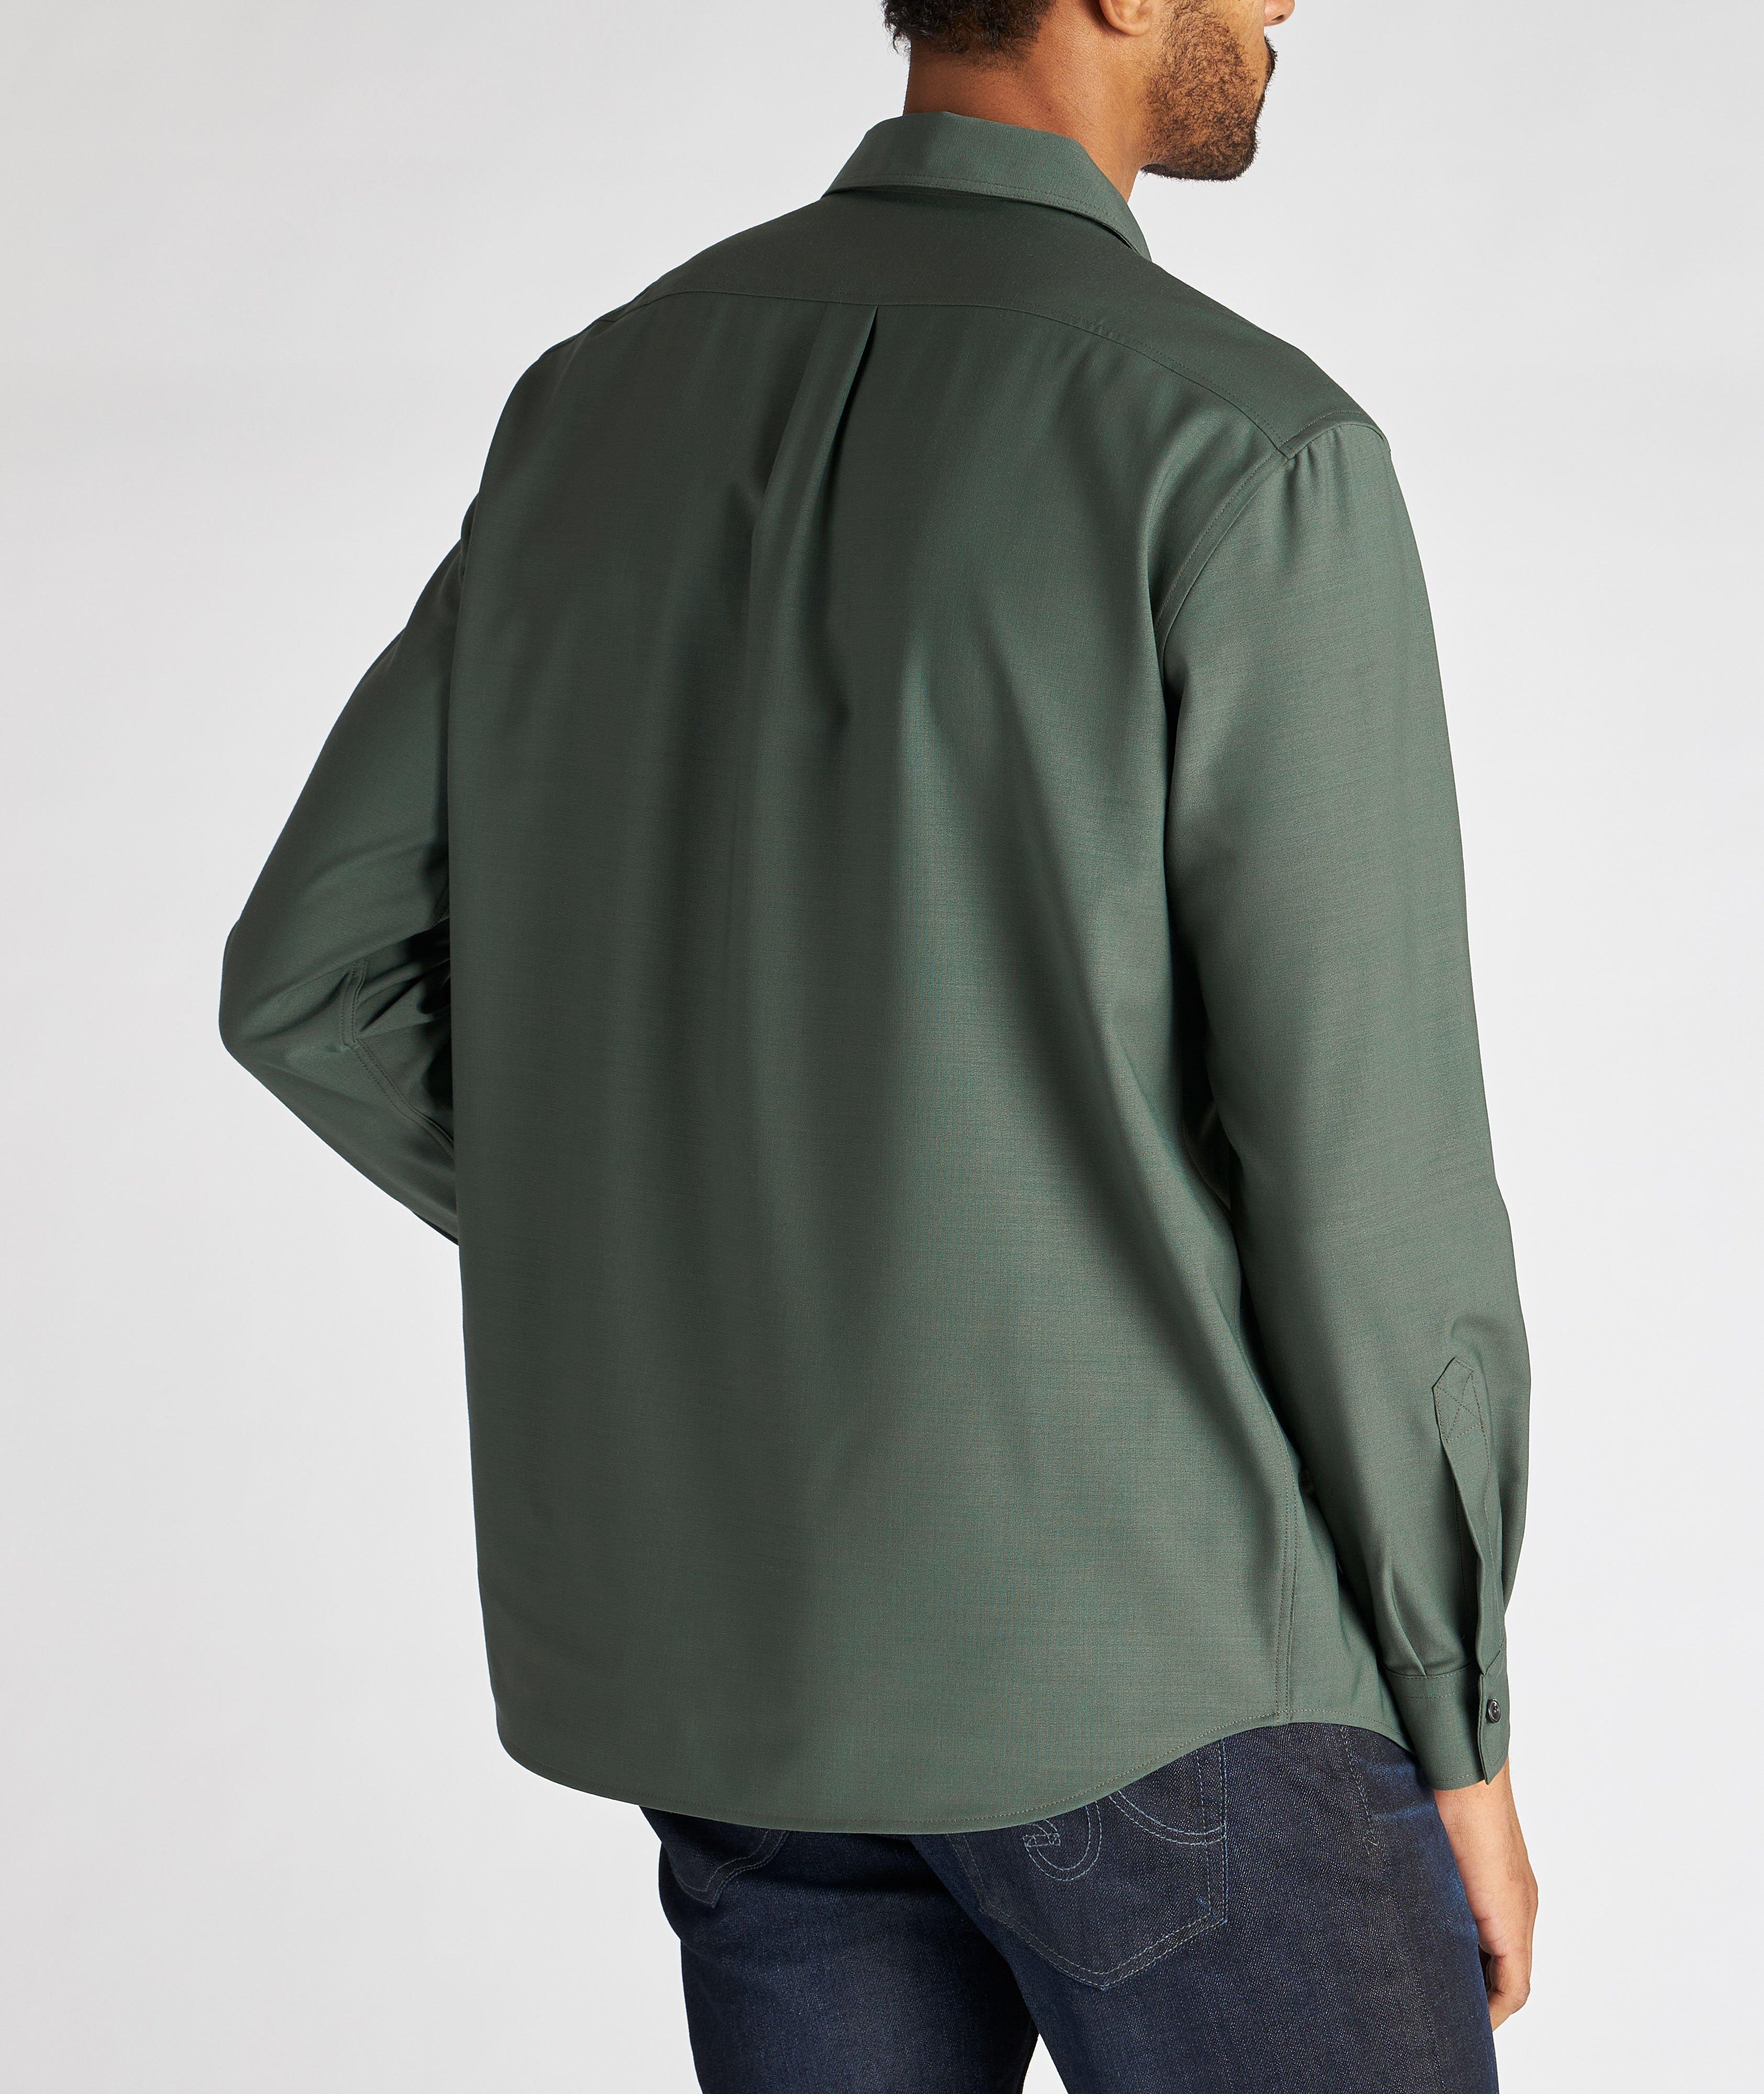 S-Wooly Chest Pocket Wool-Blend Shirt image 2